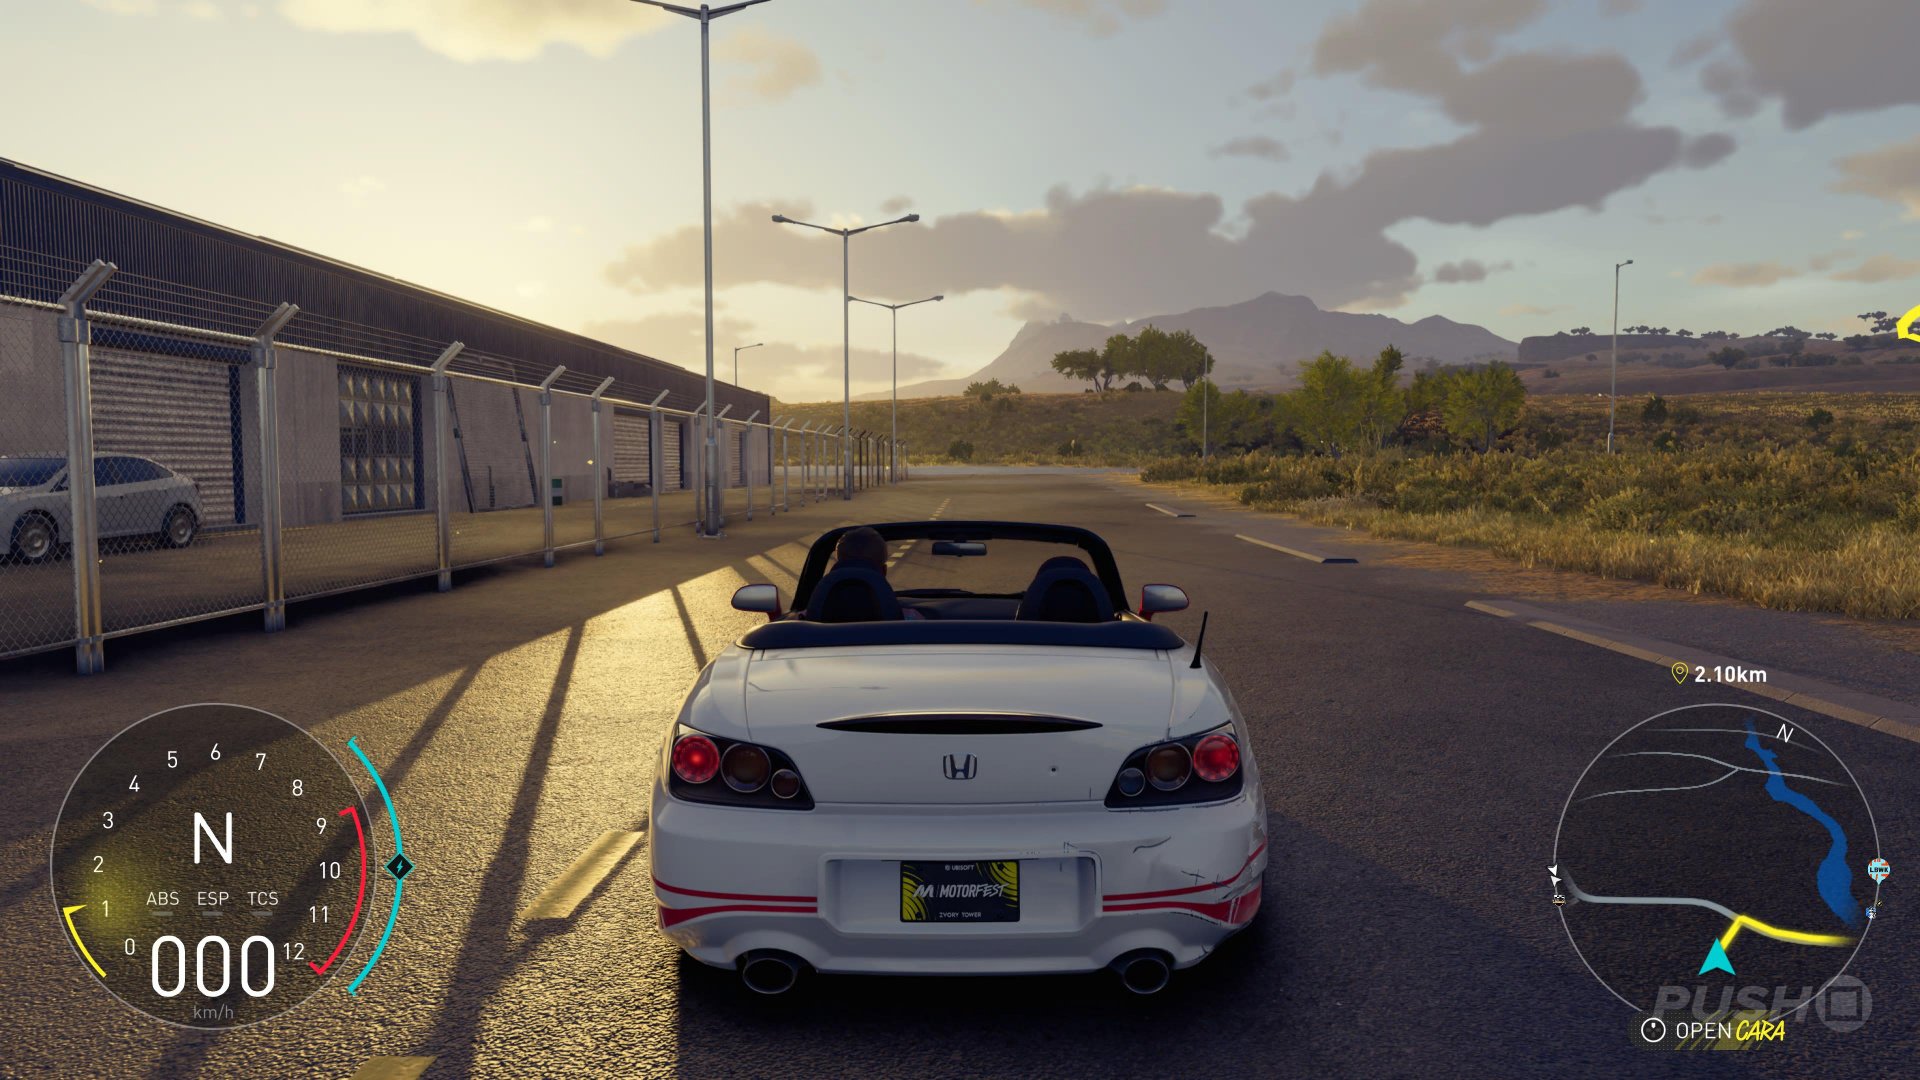 The Crew Motorfest Review –